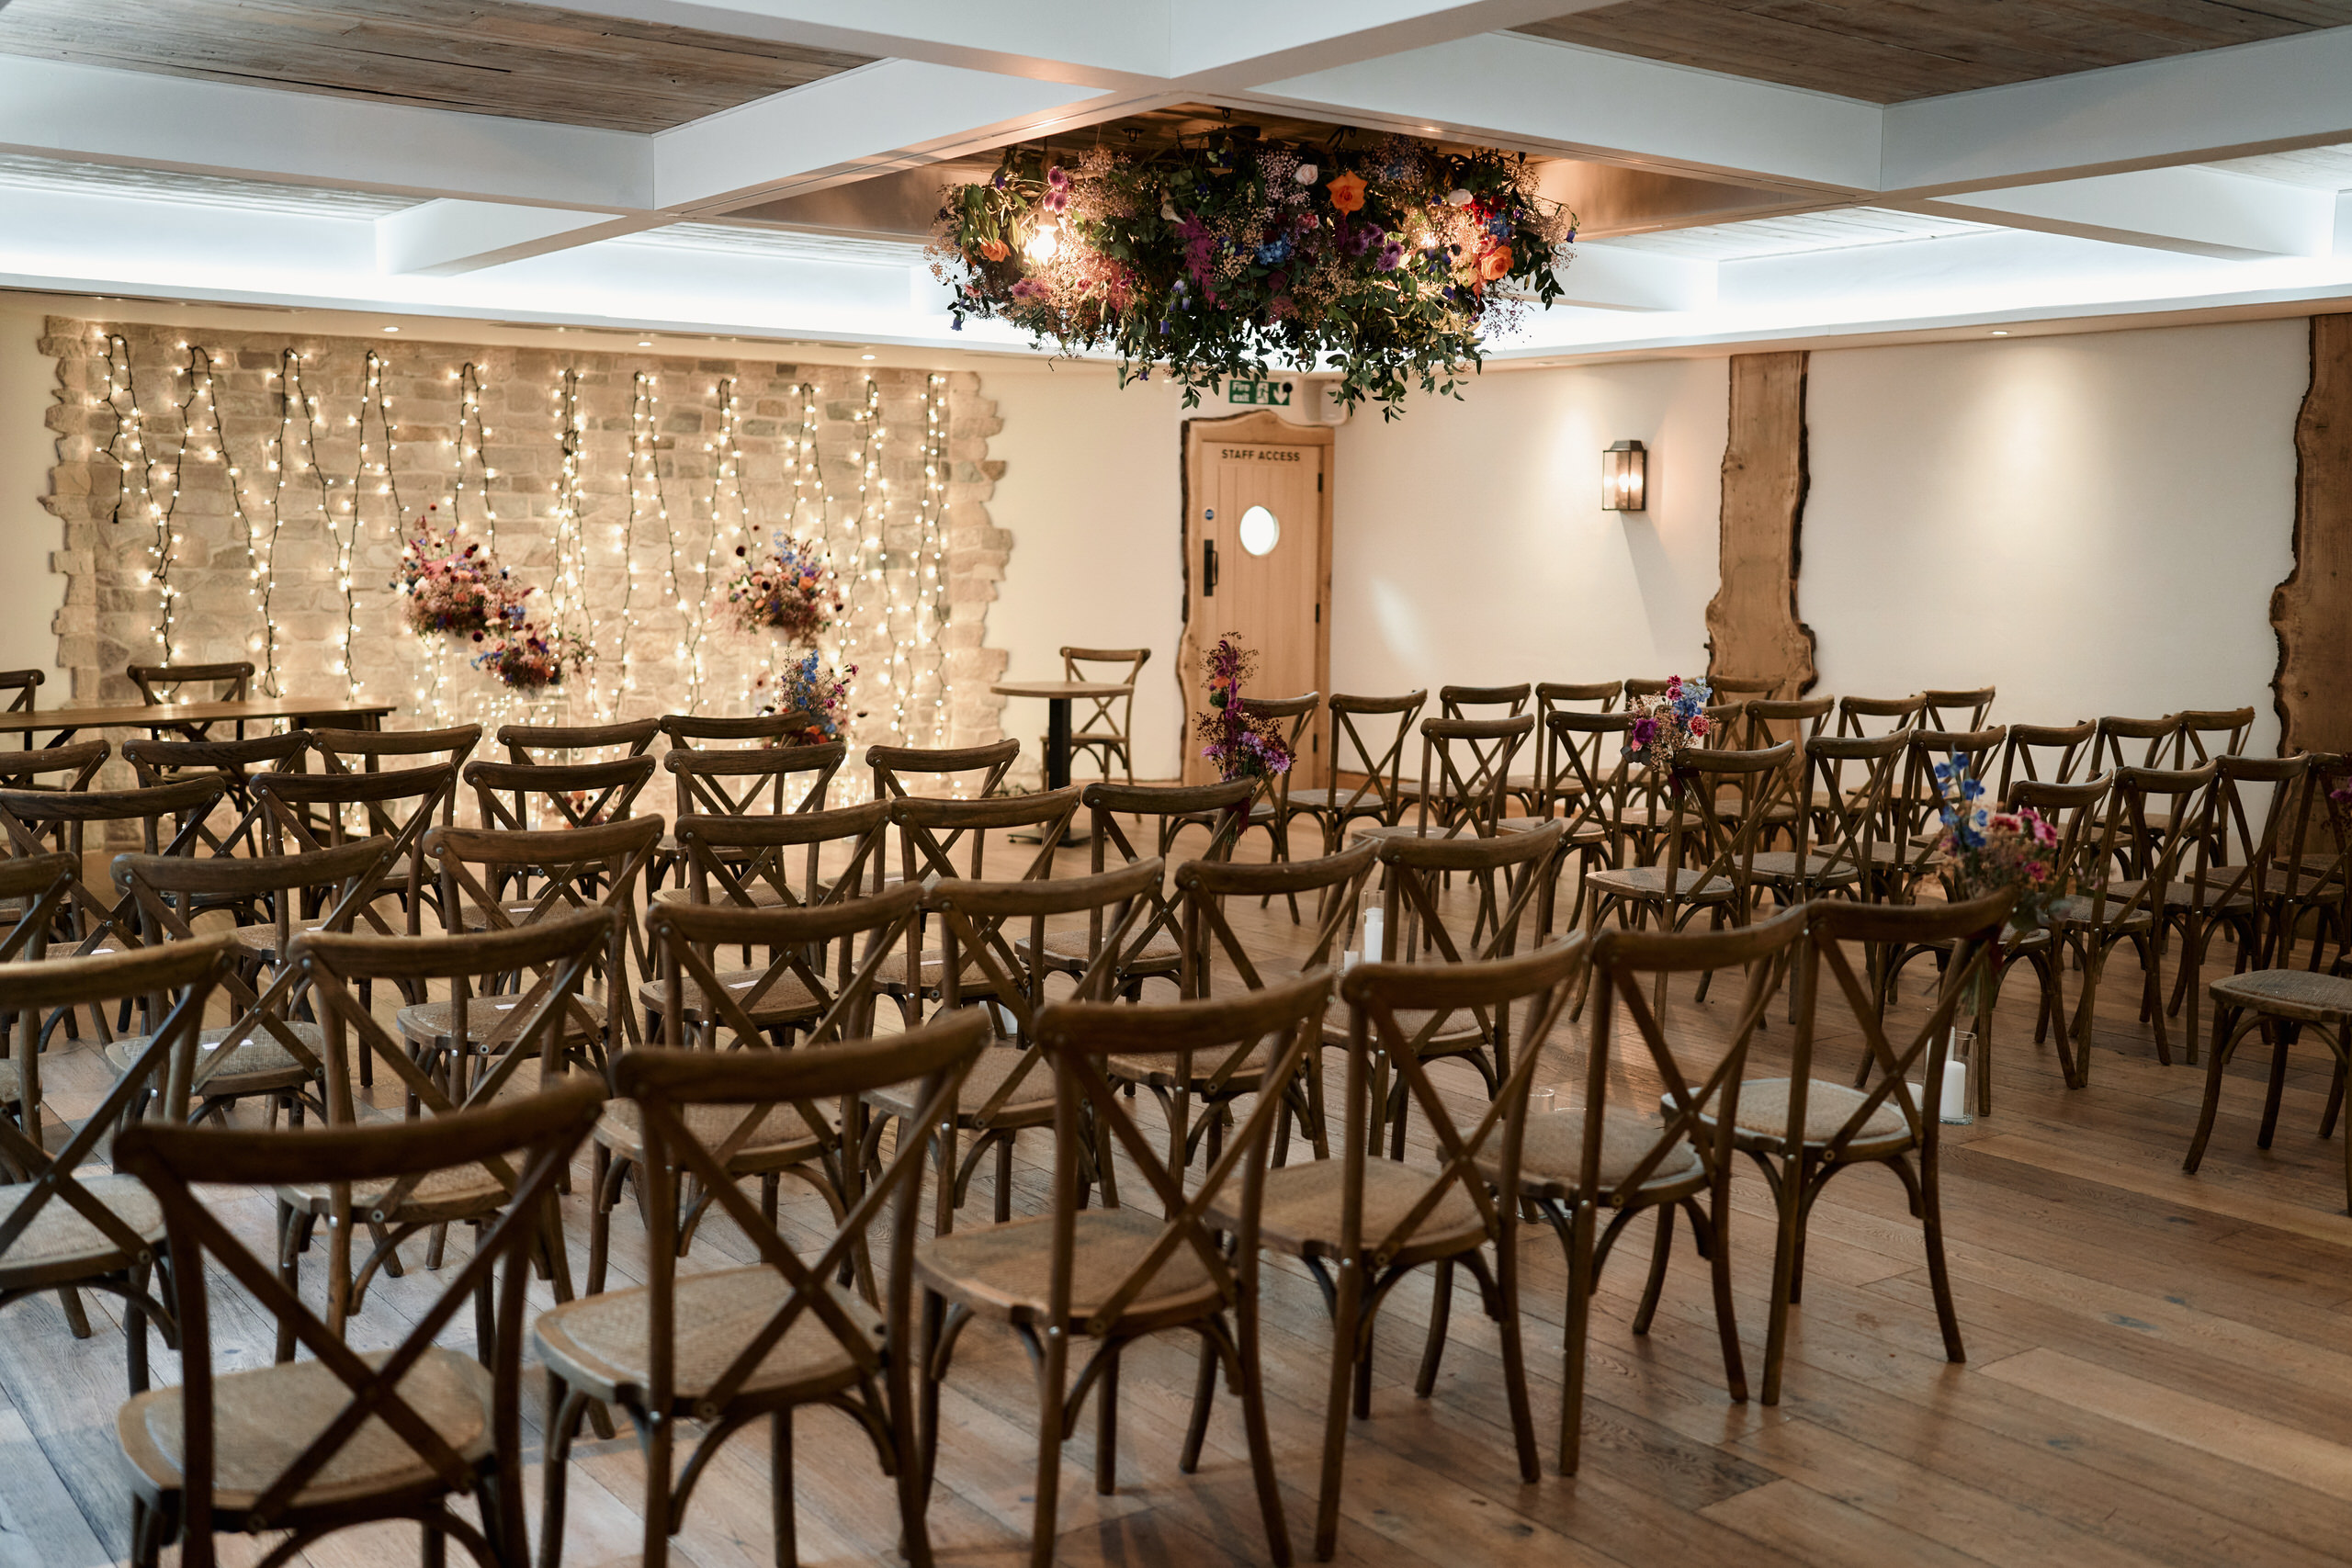 A room arranged with chairs for a wedding.